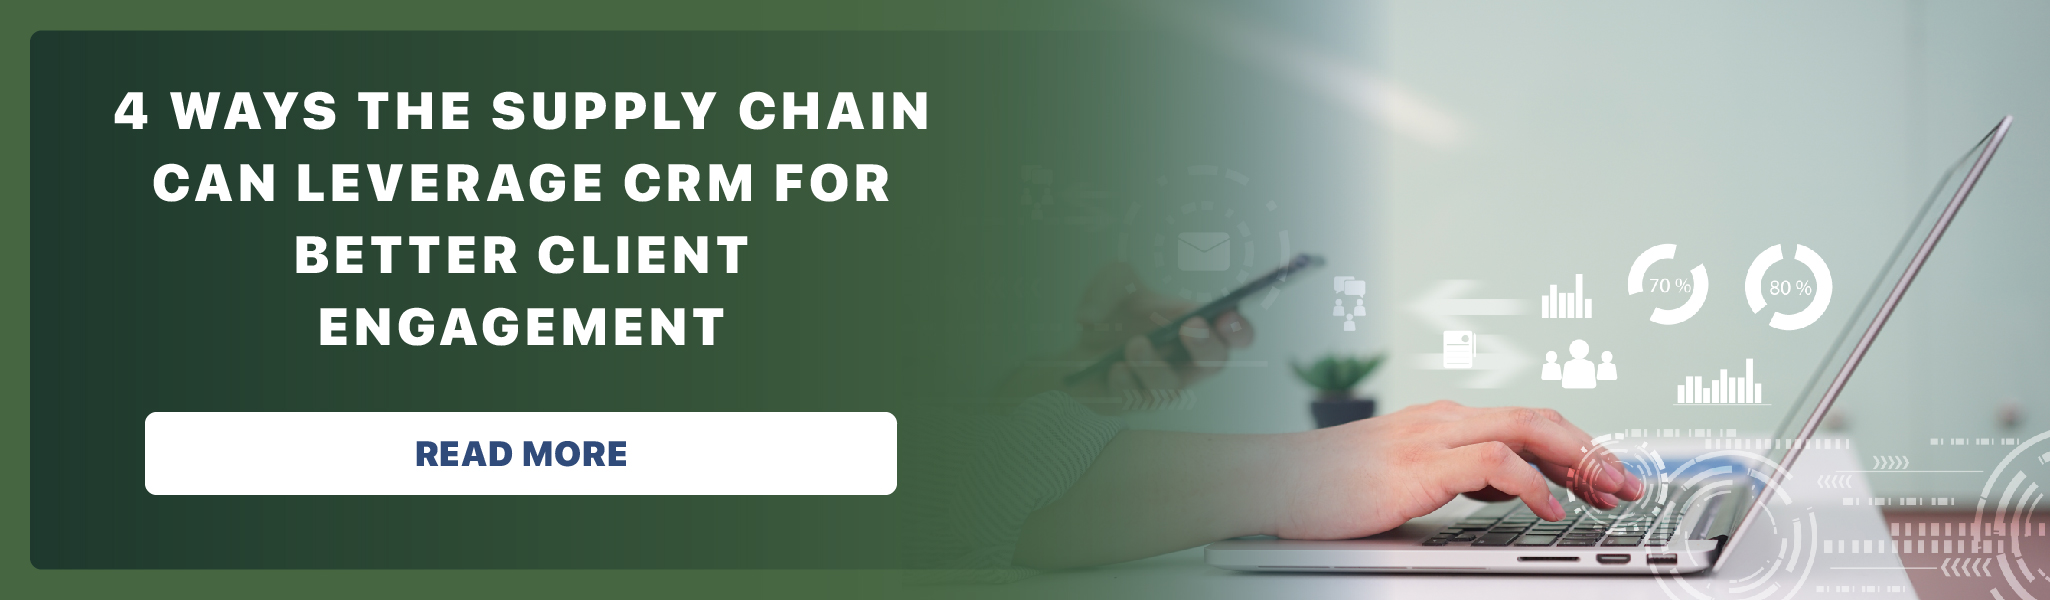 4 Ways the Supply Chain can Leverage CRM for Better Client Engagement